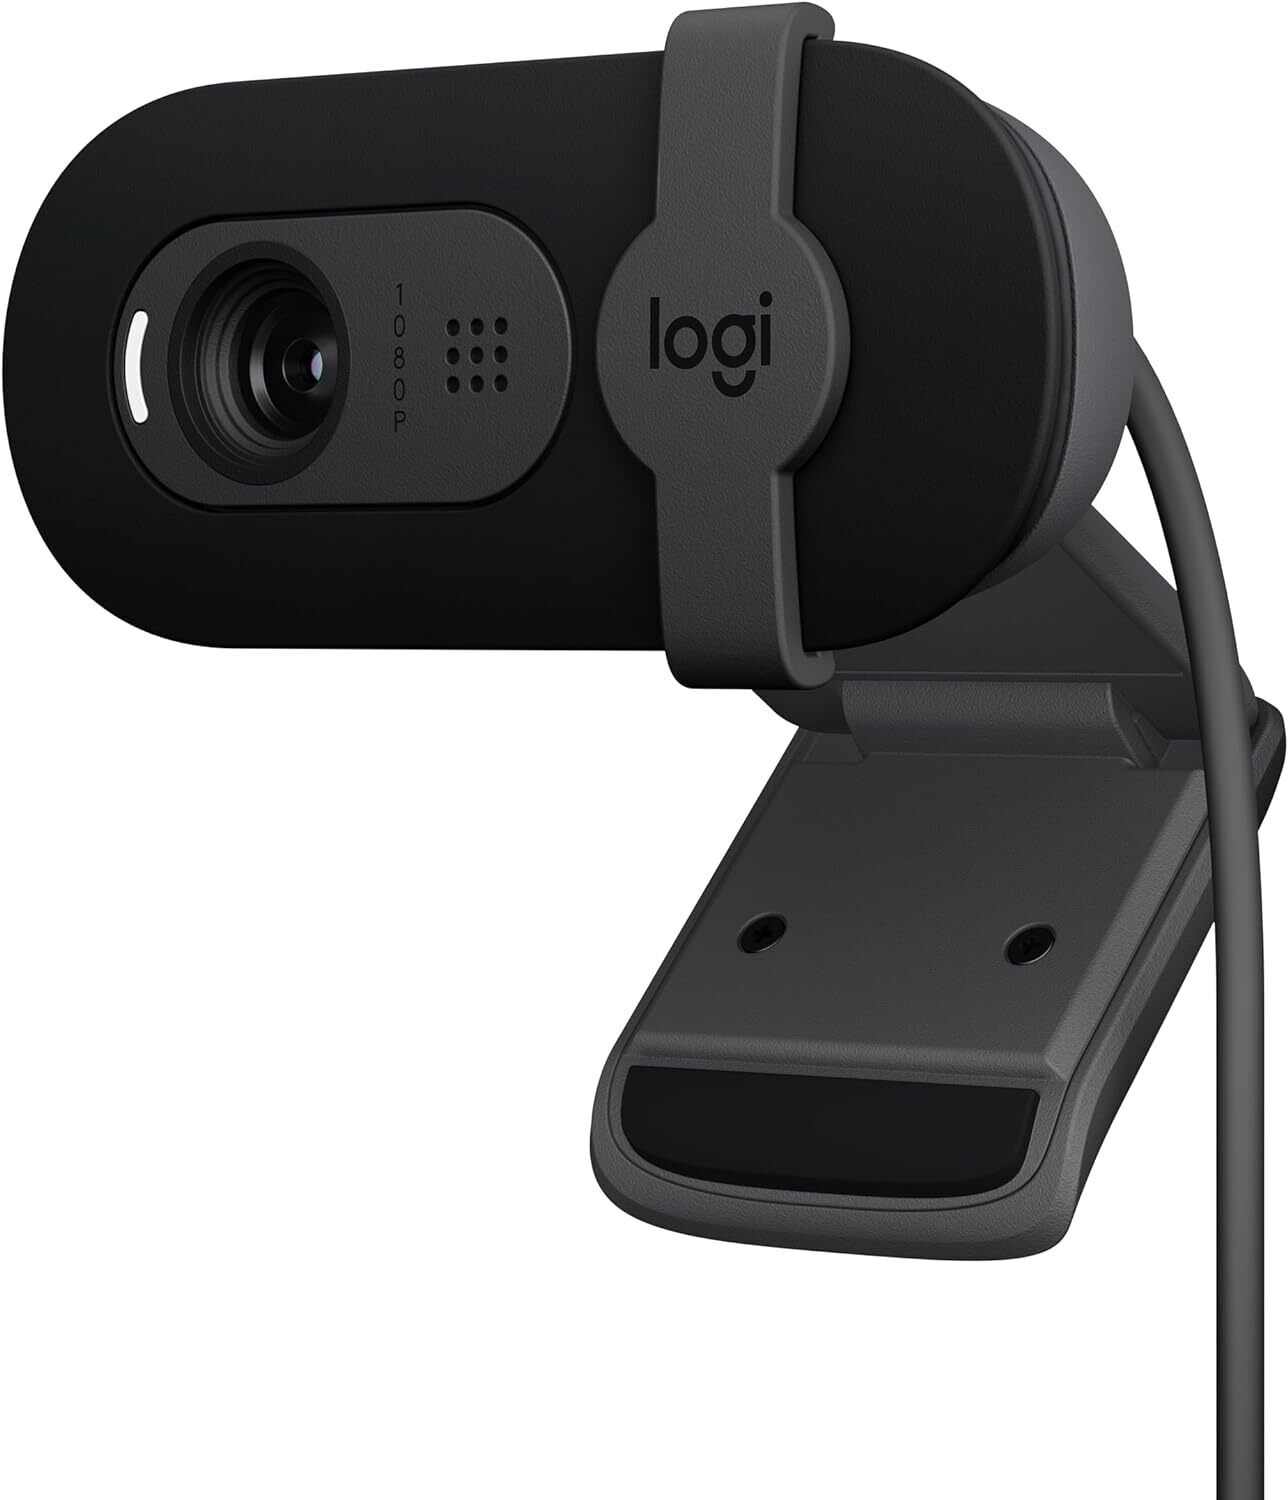 Logitech Brio 101 Full HD 1080p Webcam Made for Meetings and Works for Streaming